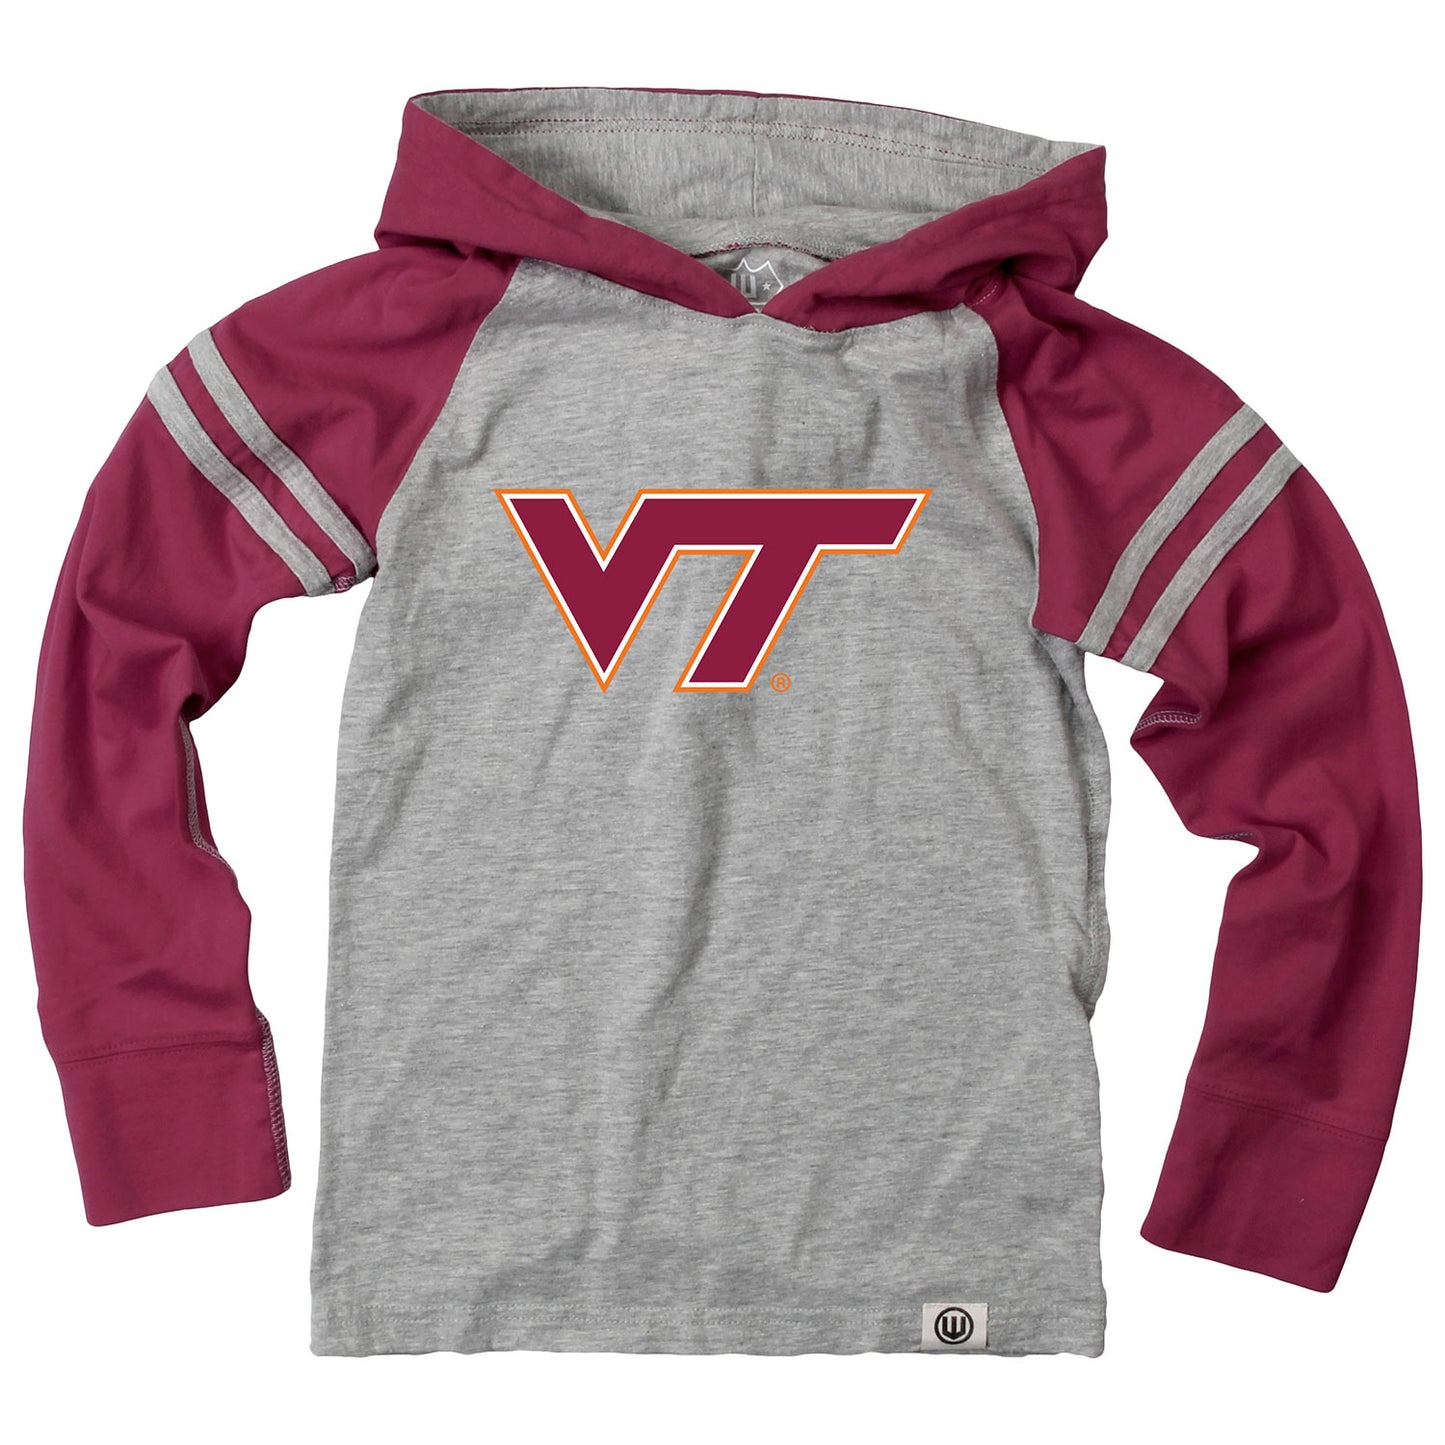 Virginia Tech Hokies Wes and Willy Youth Boys Long Sleeve Hooded T-Shirt Striped